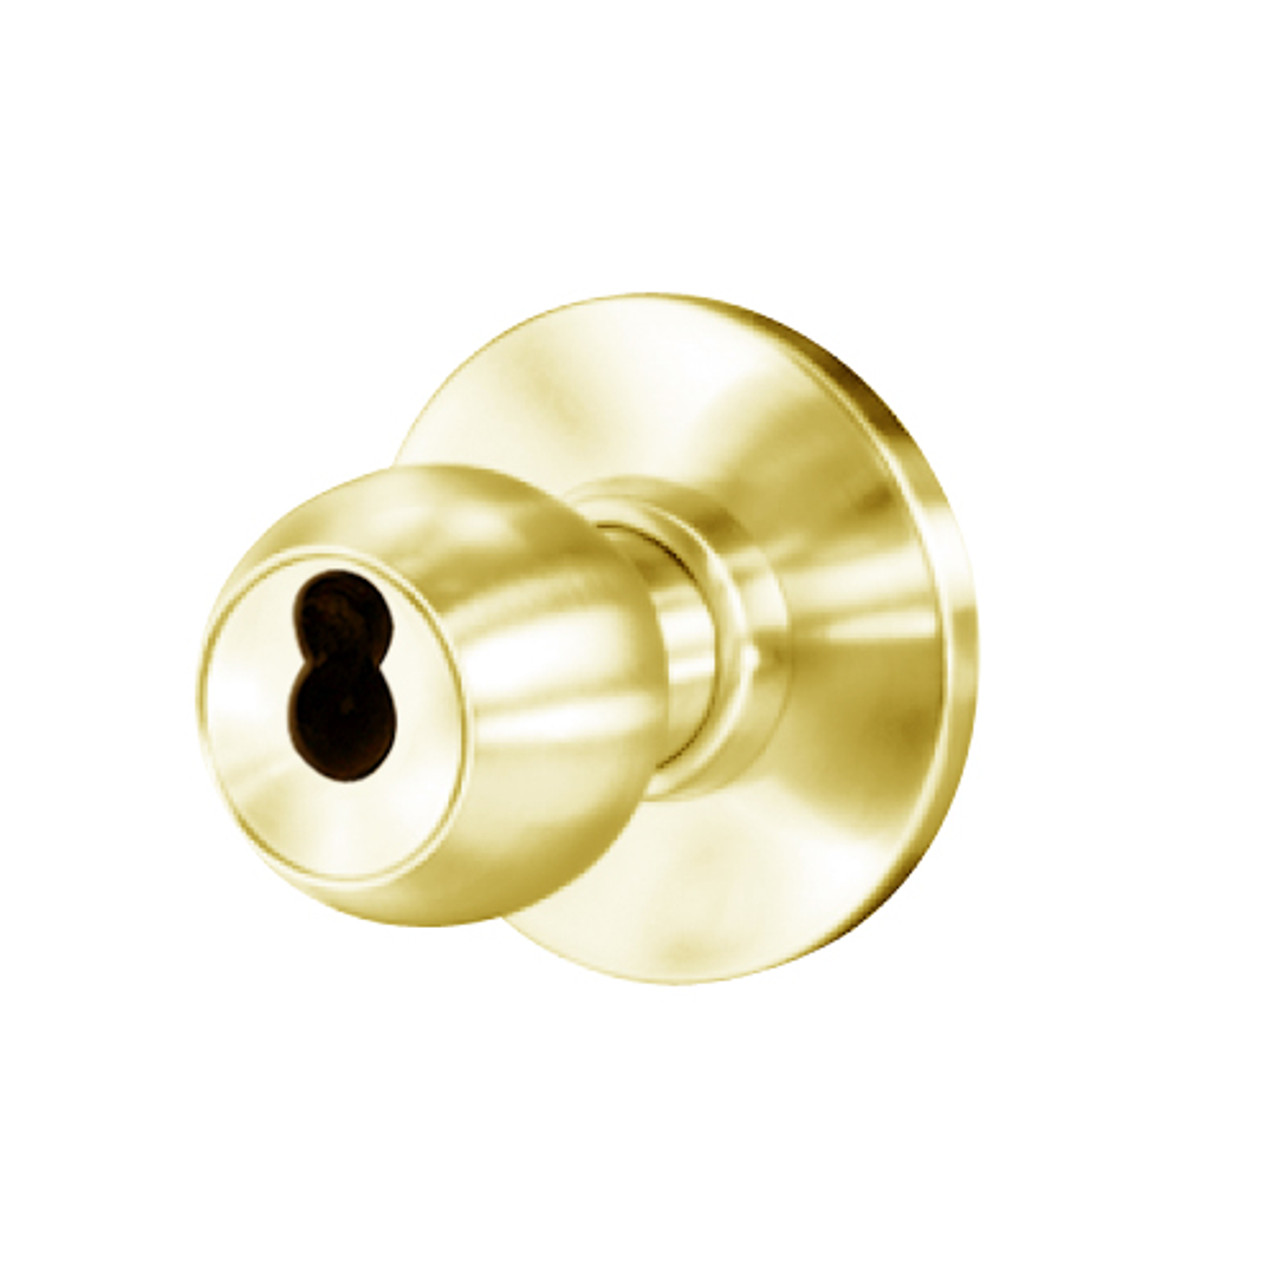 8K37YR4AS3605 Best 8K Series Exit Heavy Duty Cylindrical Knob Locks with Round Style in Bright Brass